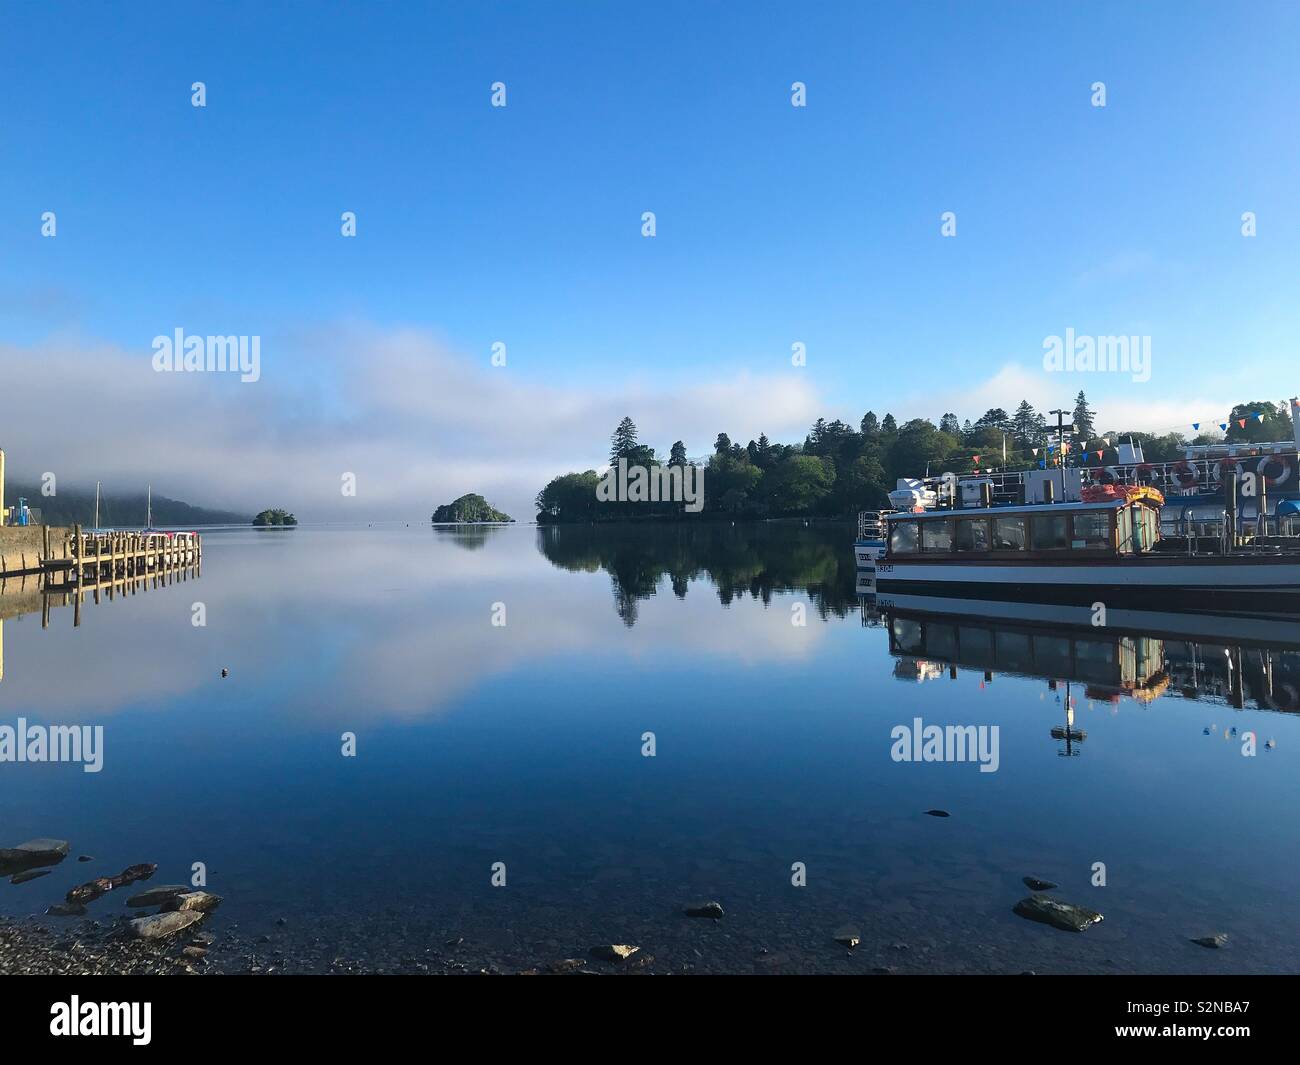 Bowness on Windermere. Still Lake. Stock Photo